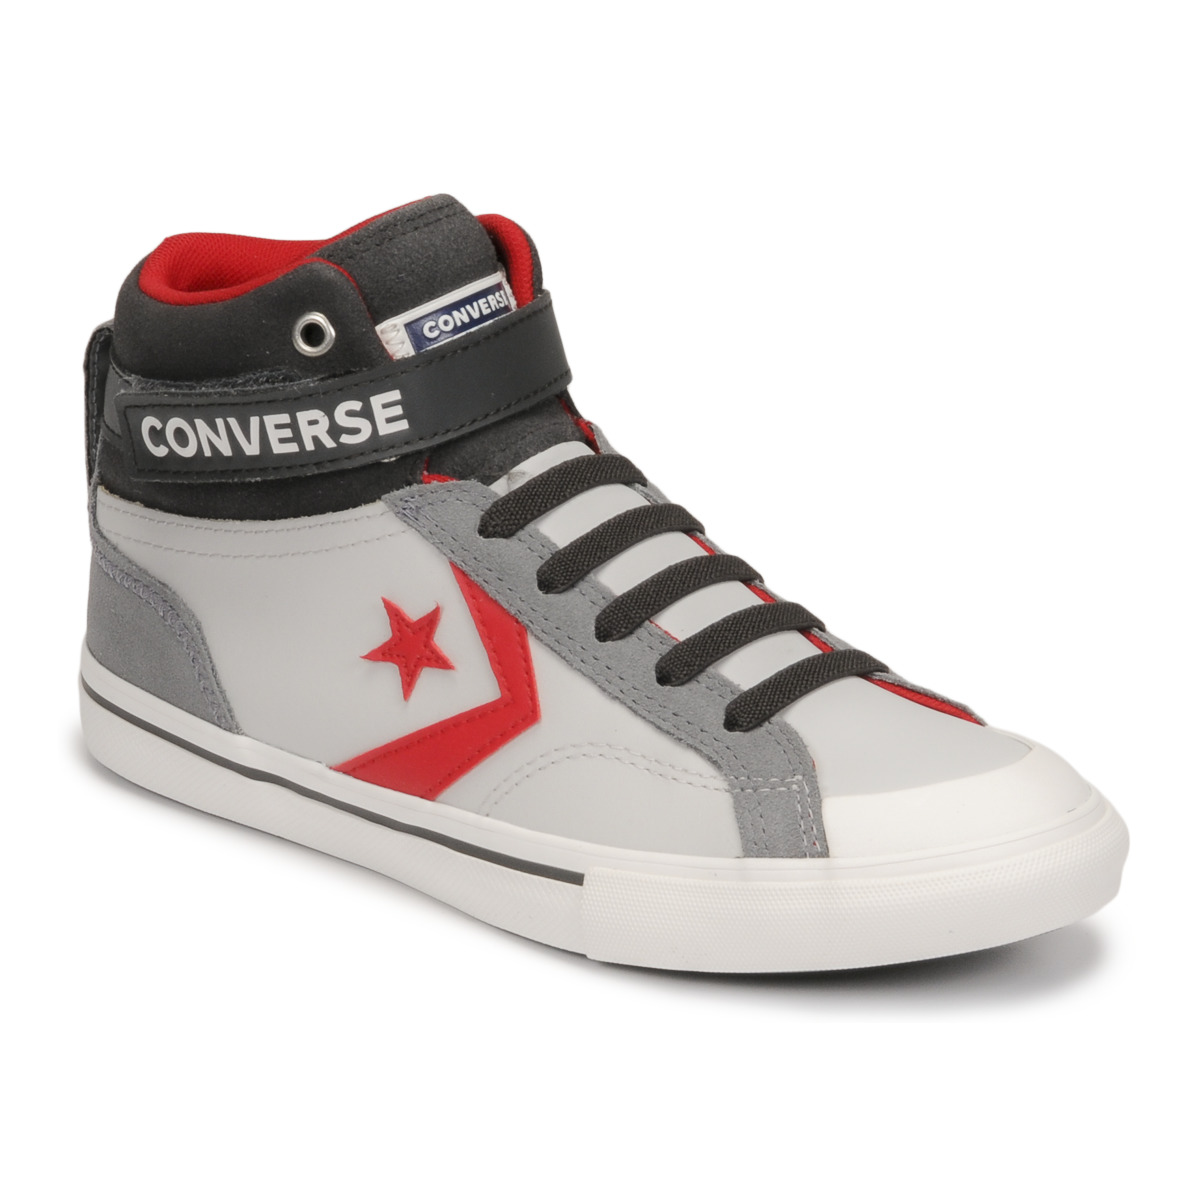 Converse PRO BLAZE ! HI Rubbersole.co.uk - trainers top Child LEATHER Grey with - TWIST £ STRAP Shoes Free Delivery Hi